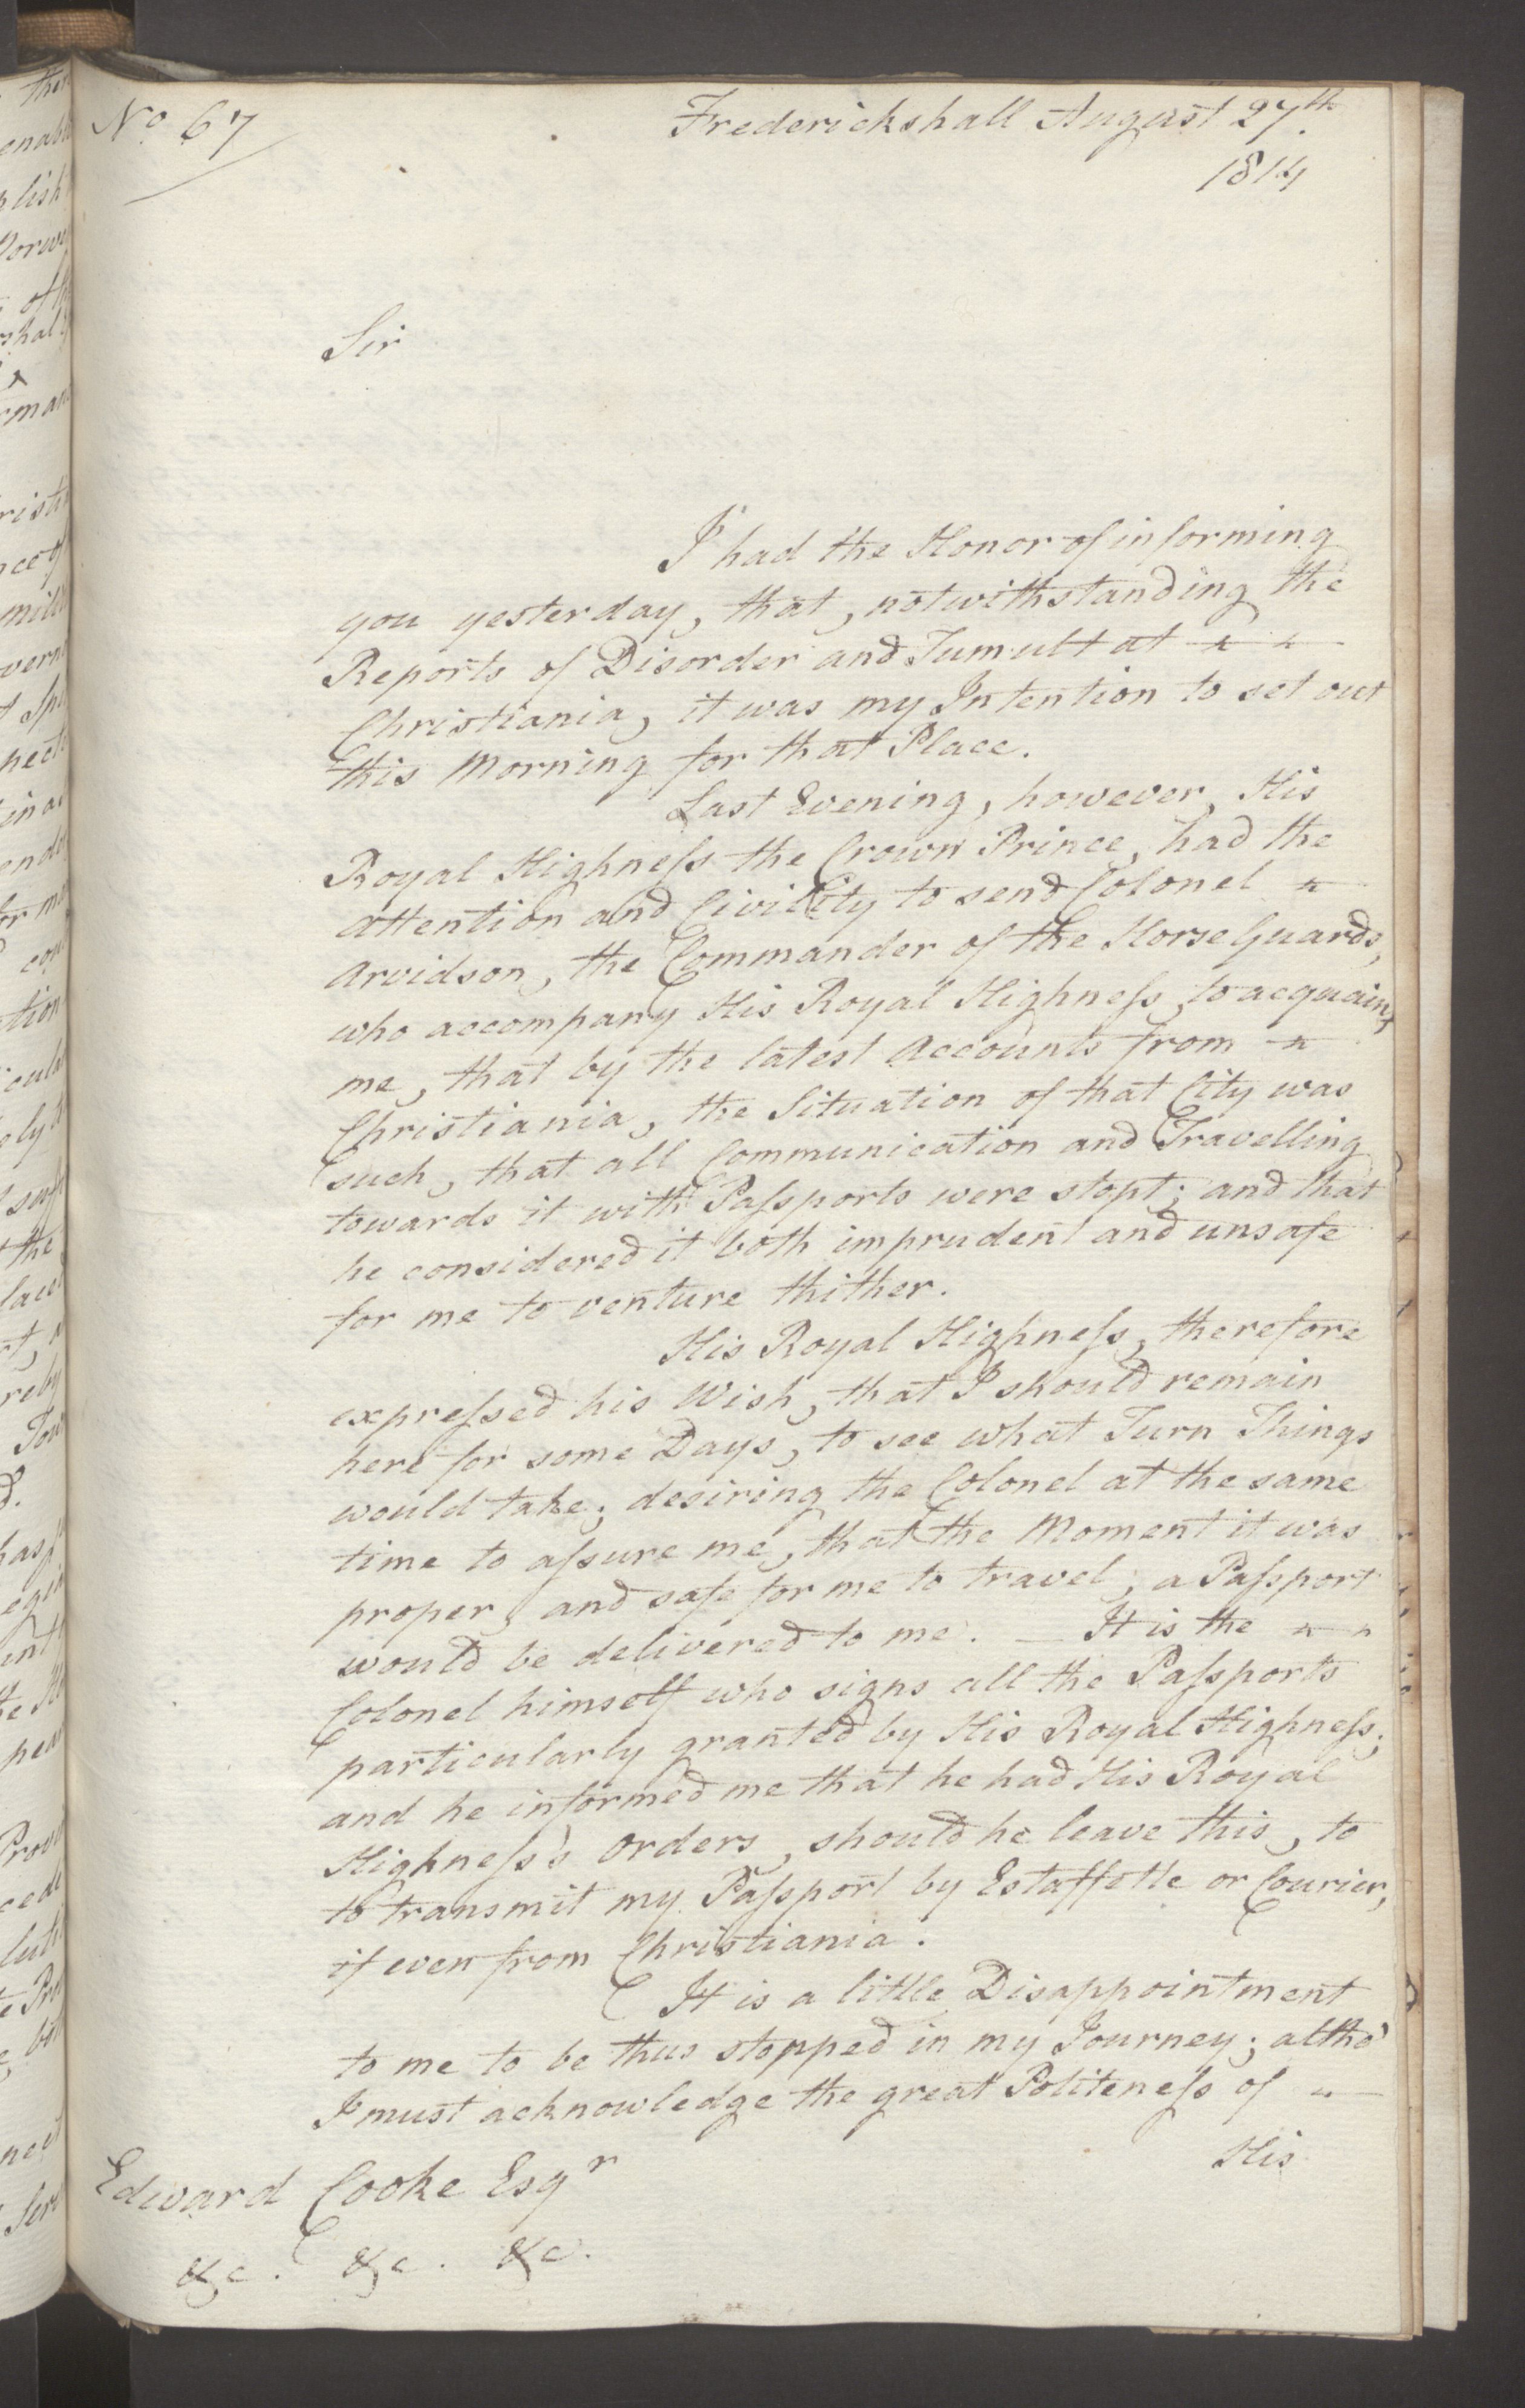 Foreign Office*, UKA/-/FO 38/16: Sir C. Gordon. Reports from Malmö, Jonkoping, and Helsingborg, 1814, p. 99